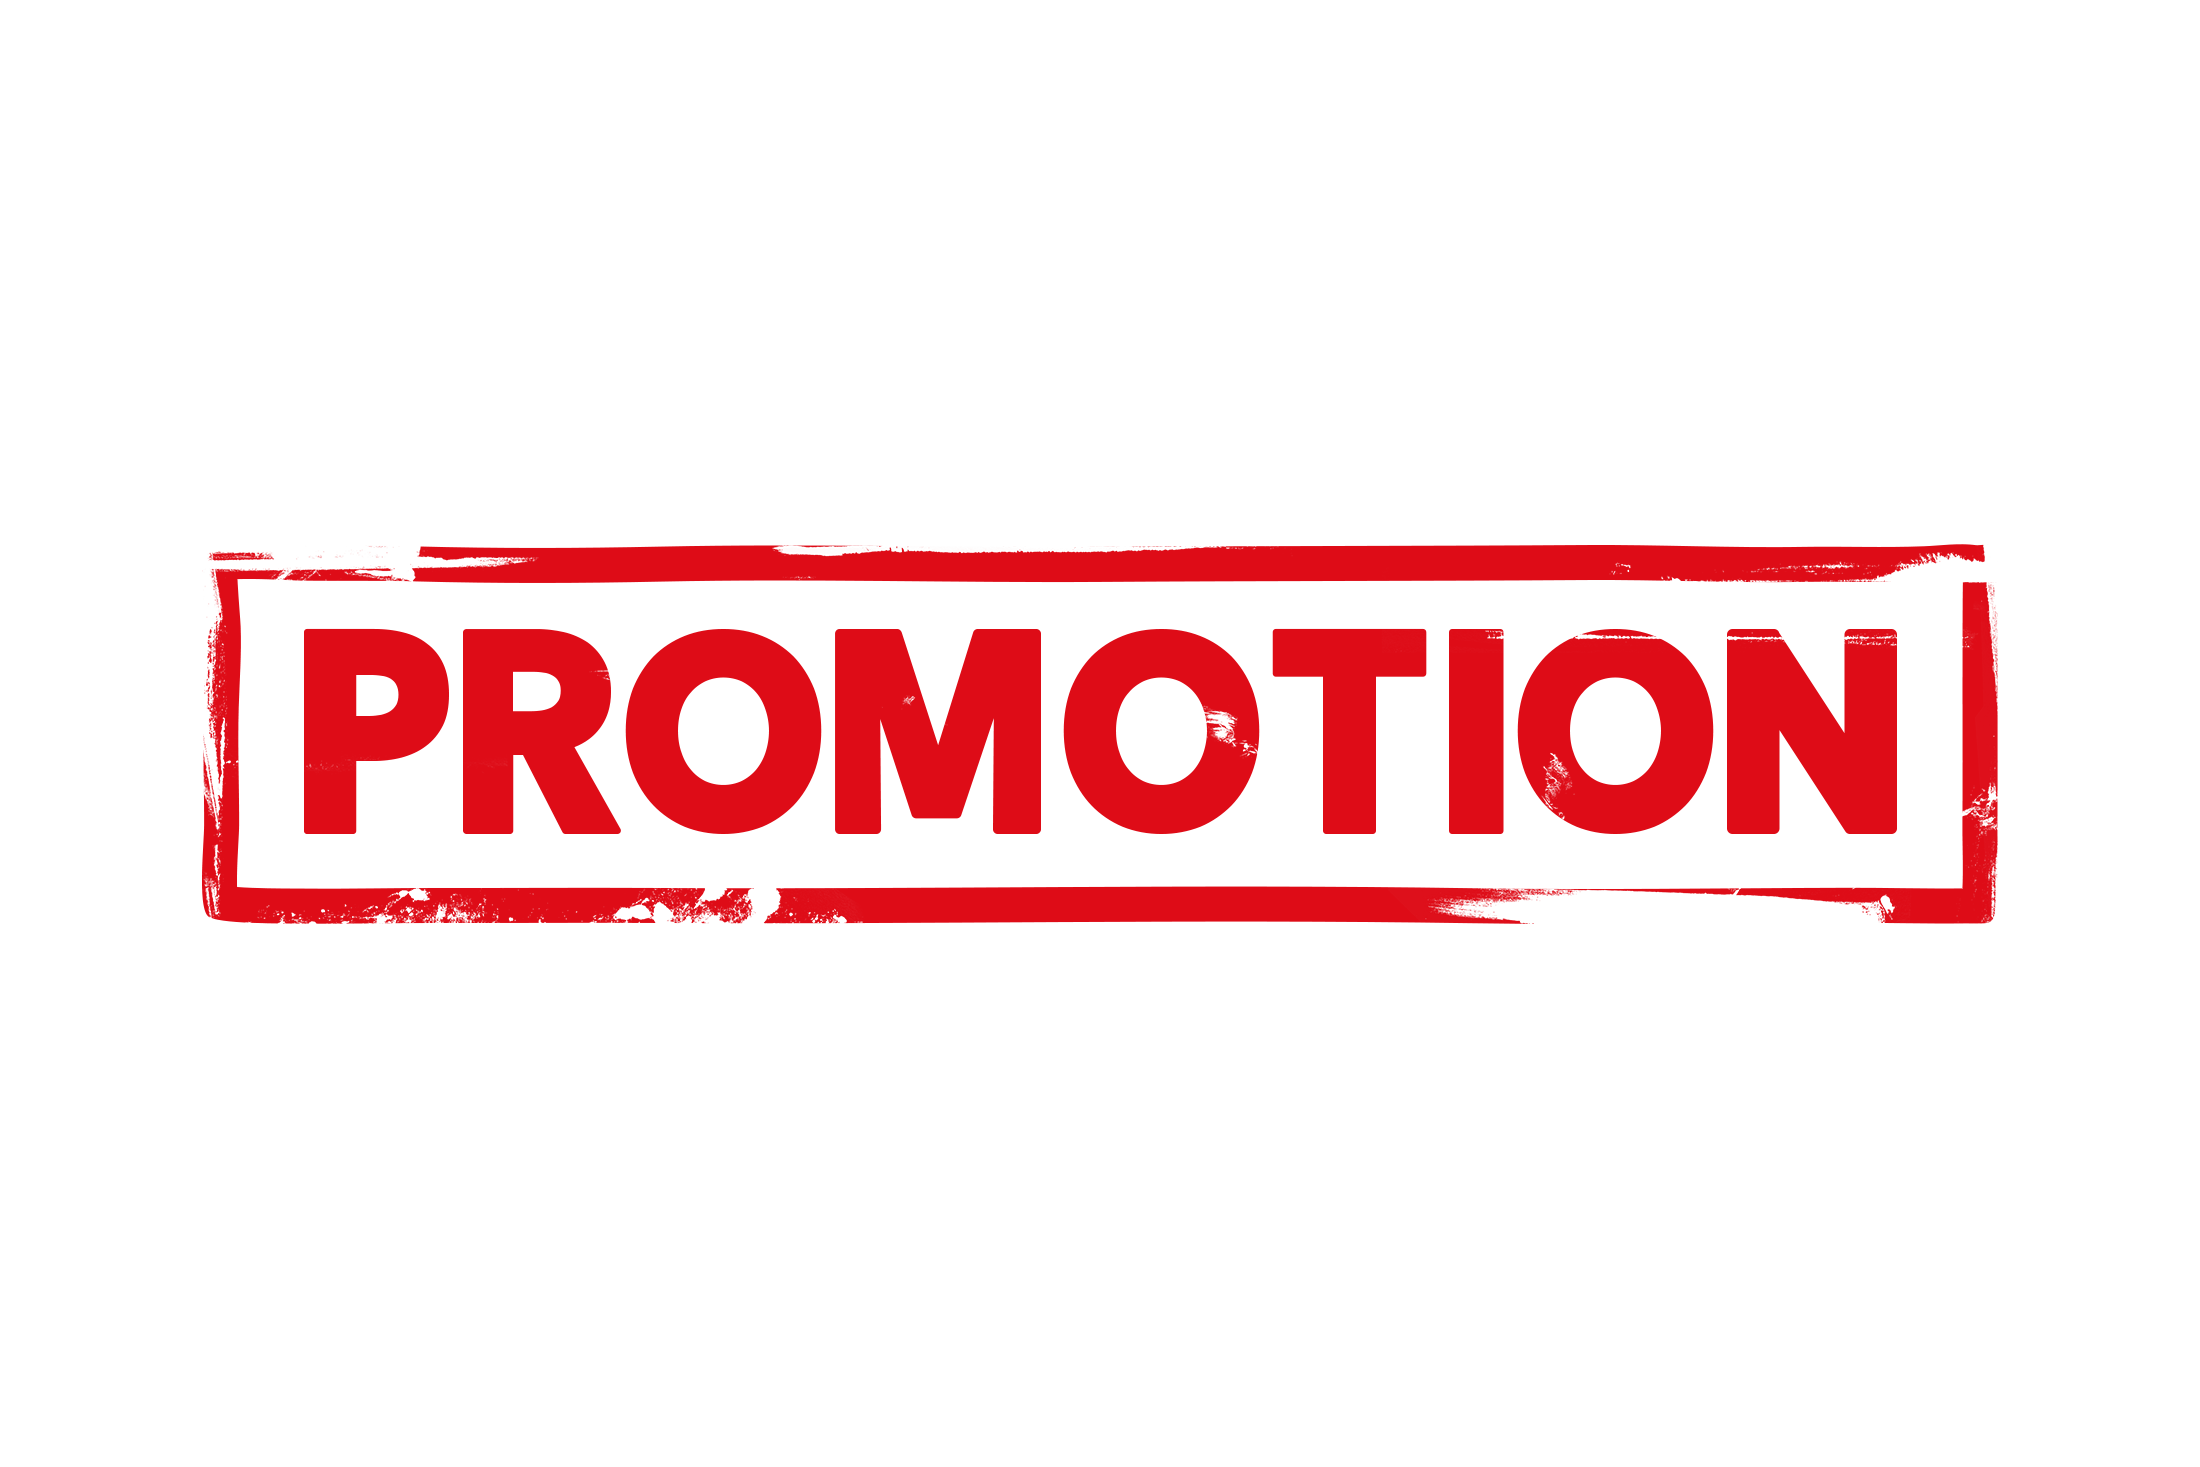 promotion images png